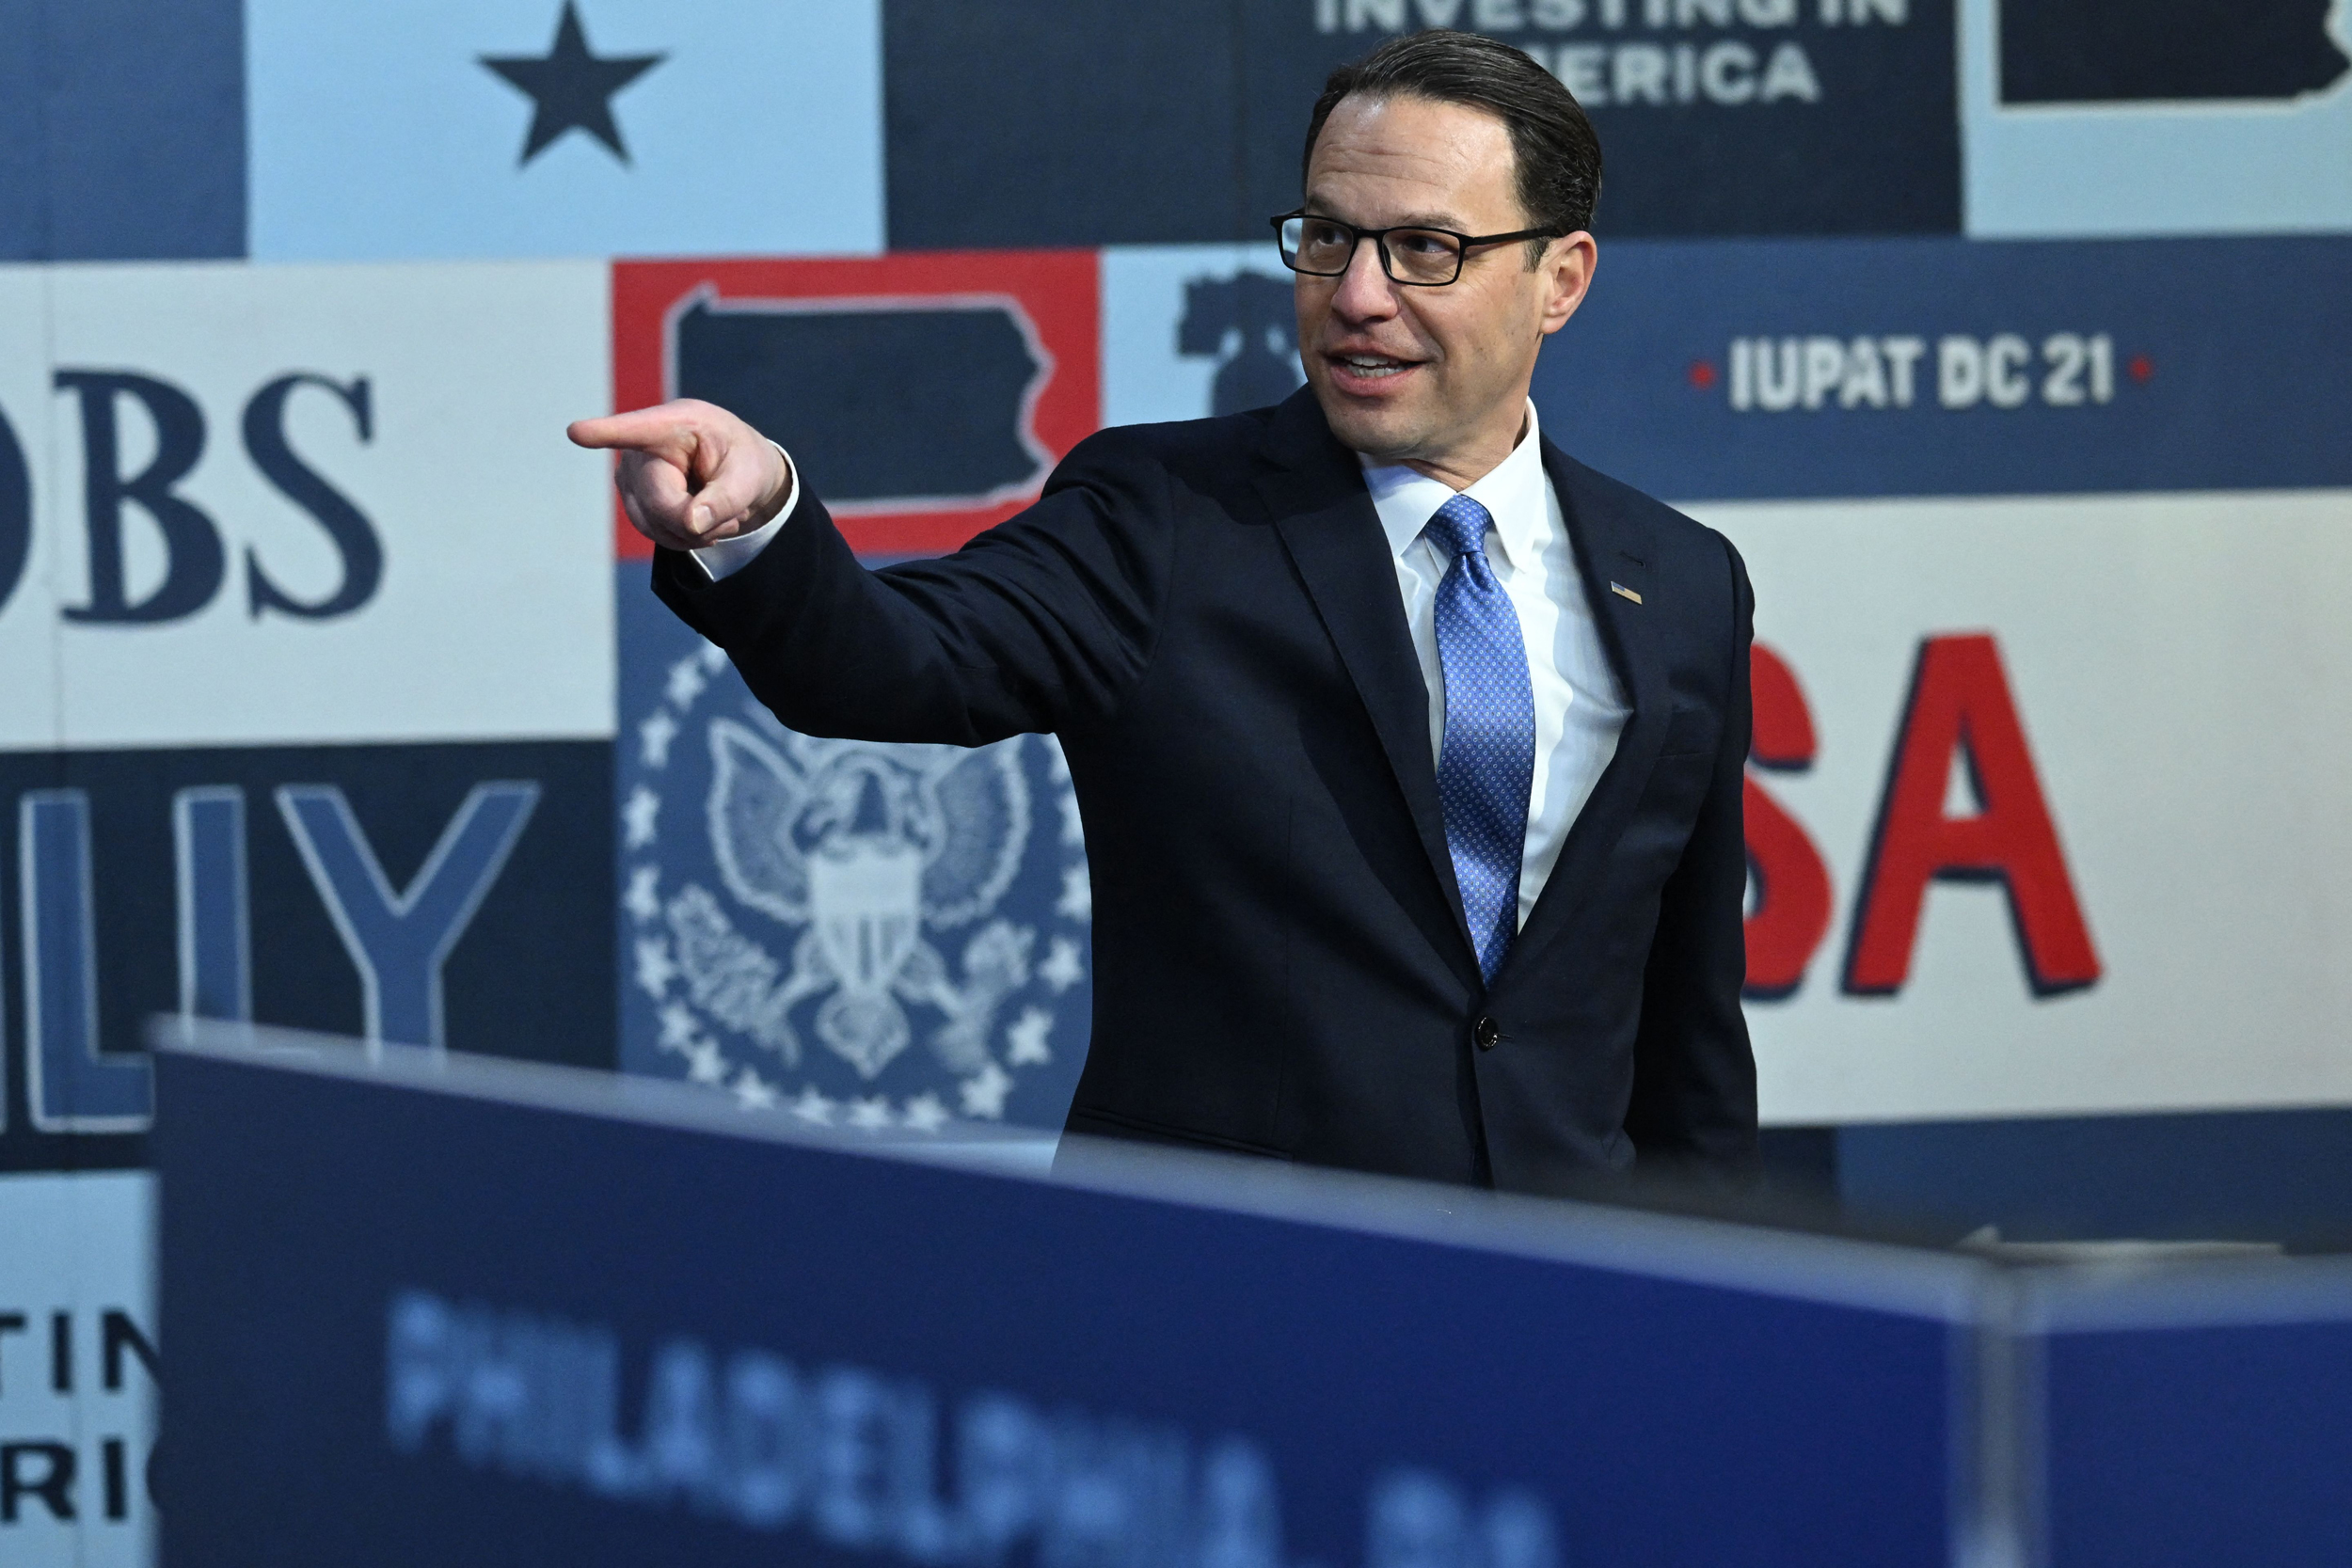 Pennsylvania Governor Josh Shapiro arrives to speak at the Finishing Trades Institute in Philadelphia on March 9, 2023. Credit: Saul Loeb/AFP via Getty Images